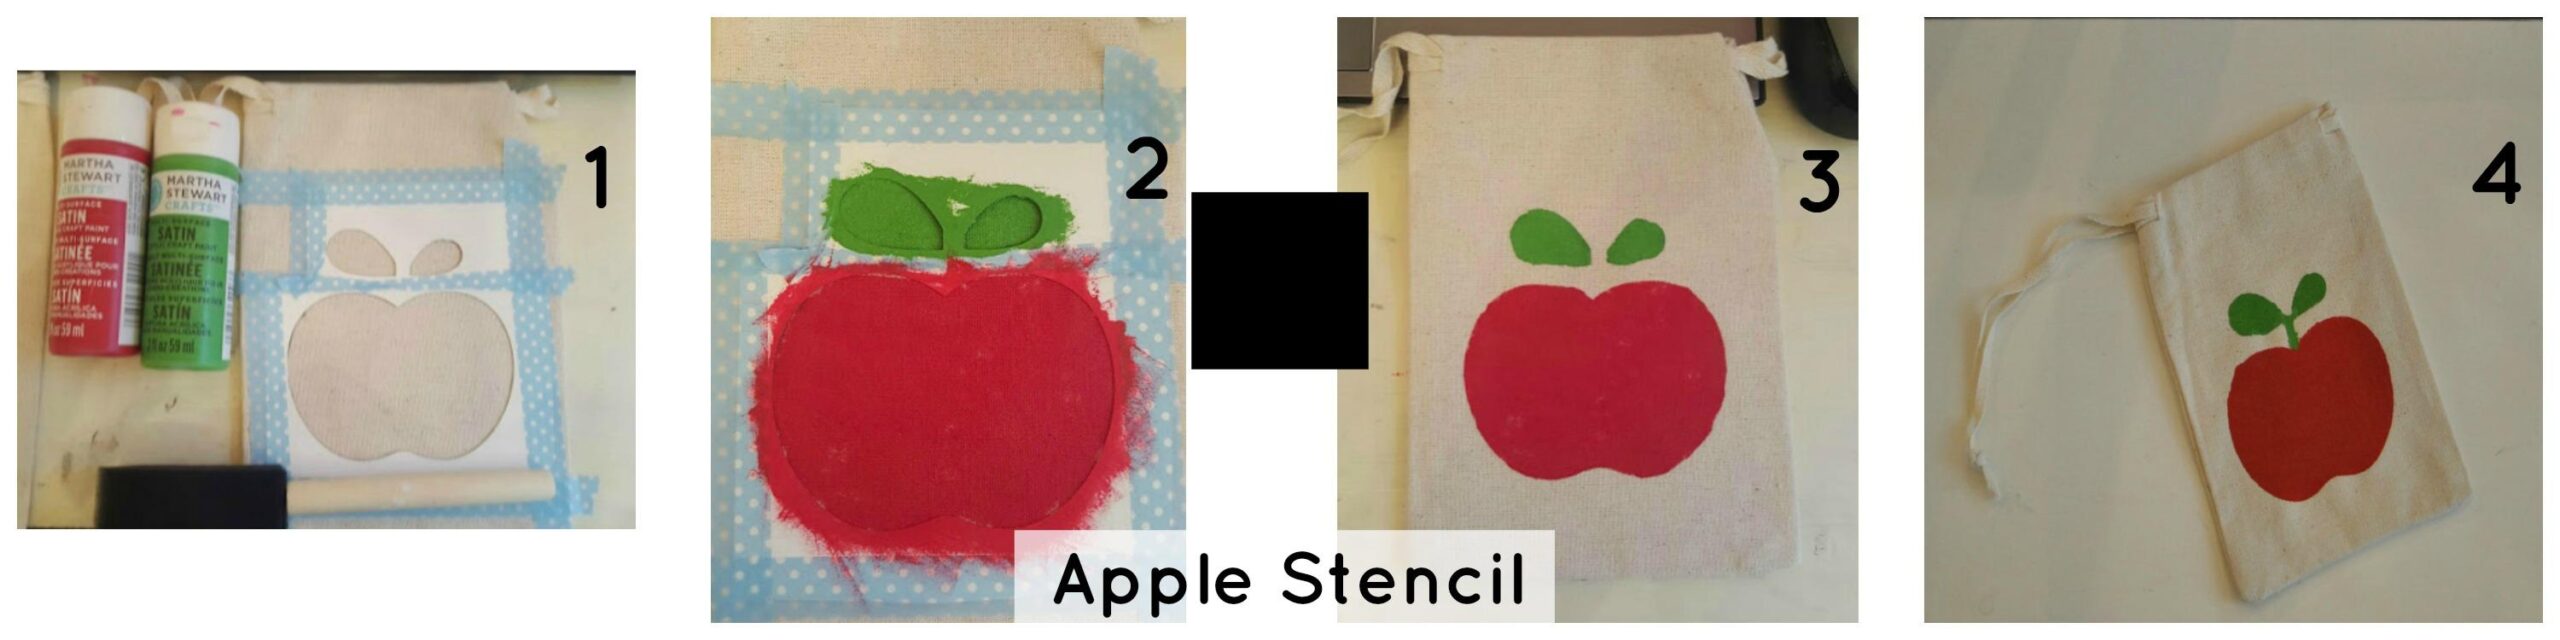 Apple Stencil How-to - free apple template